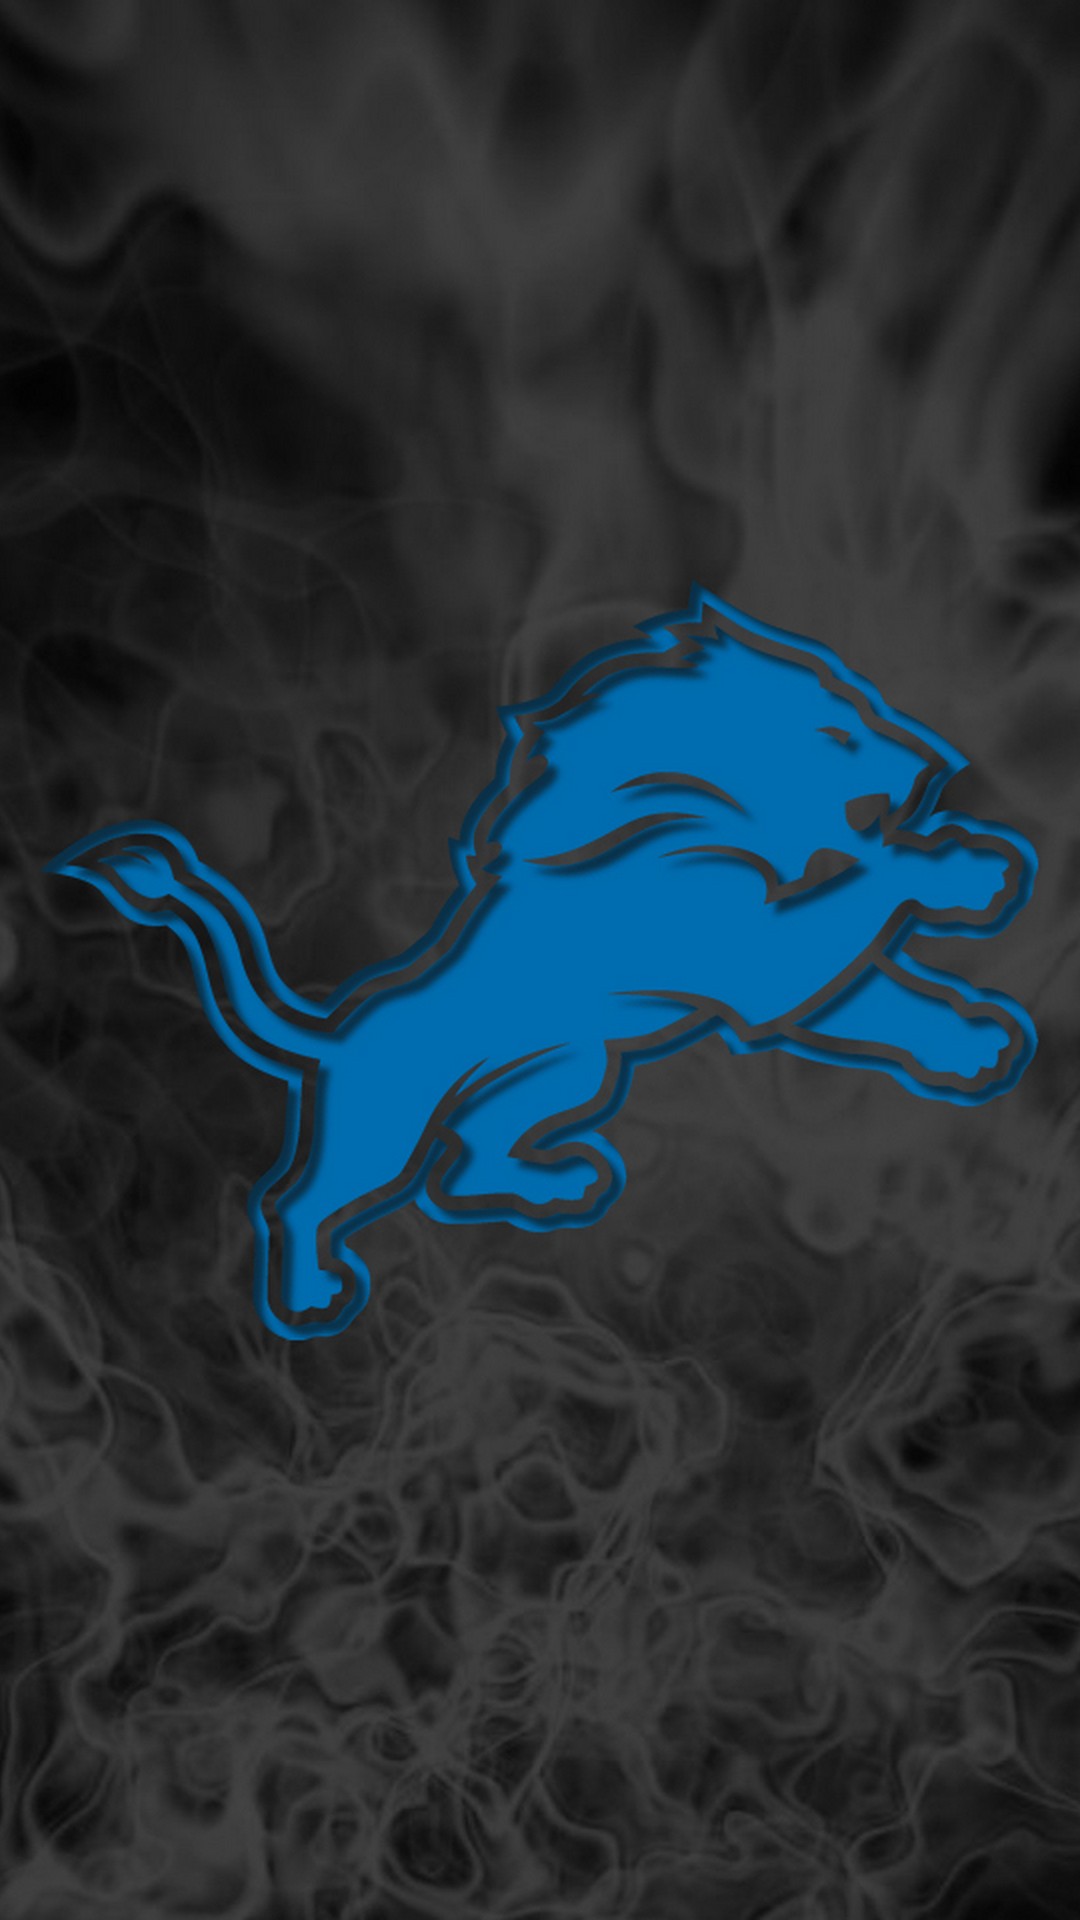 Detroit Lions iPhone Screensaver With high-resolution 1080X1920 pixel. Donwload and set as wallpaper for your iPhone X, iPhone XS home screen backgrounds, XS Max, XR, iPhone8 lock screen wallpaper, iPhone 7, 6, SE, and other mobile devices